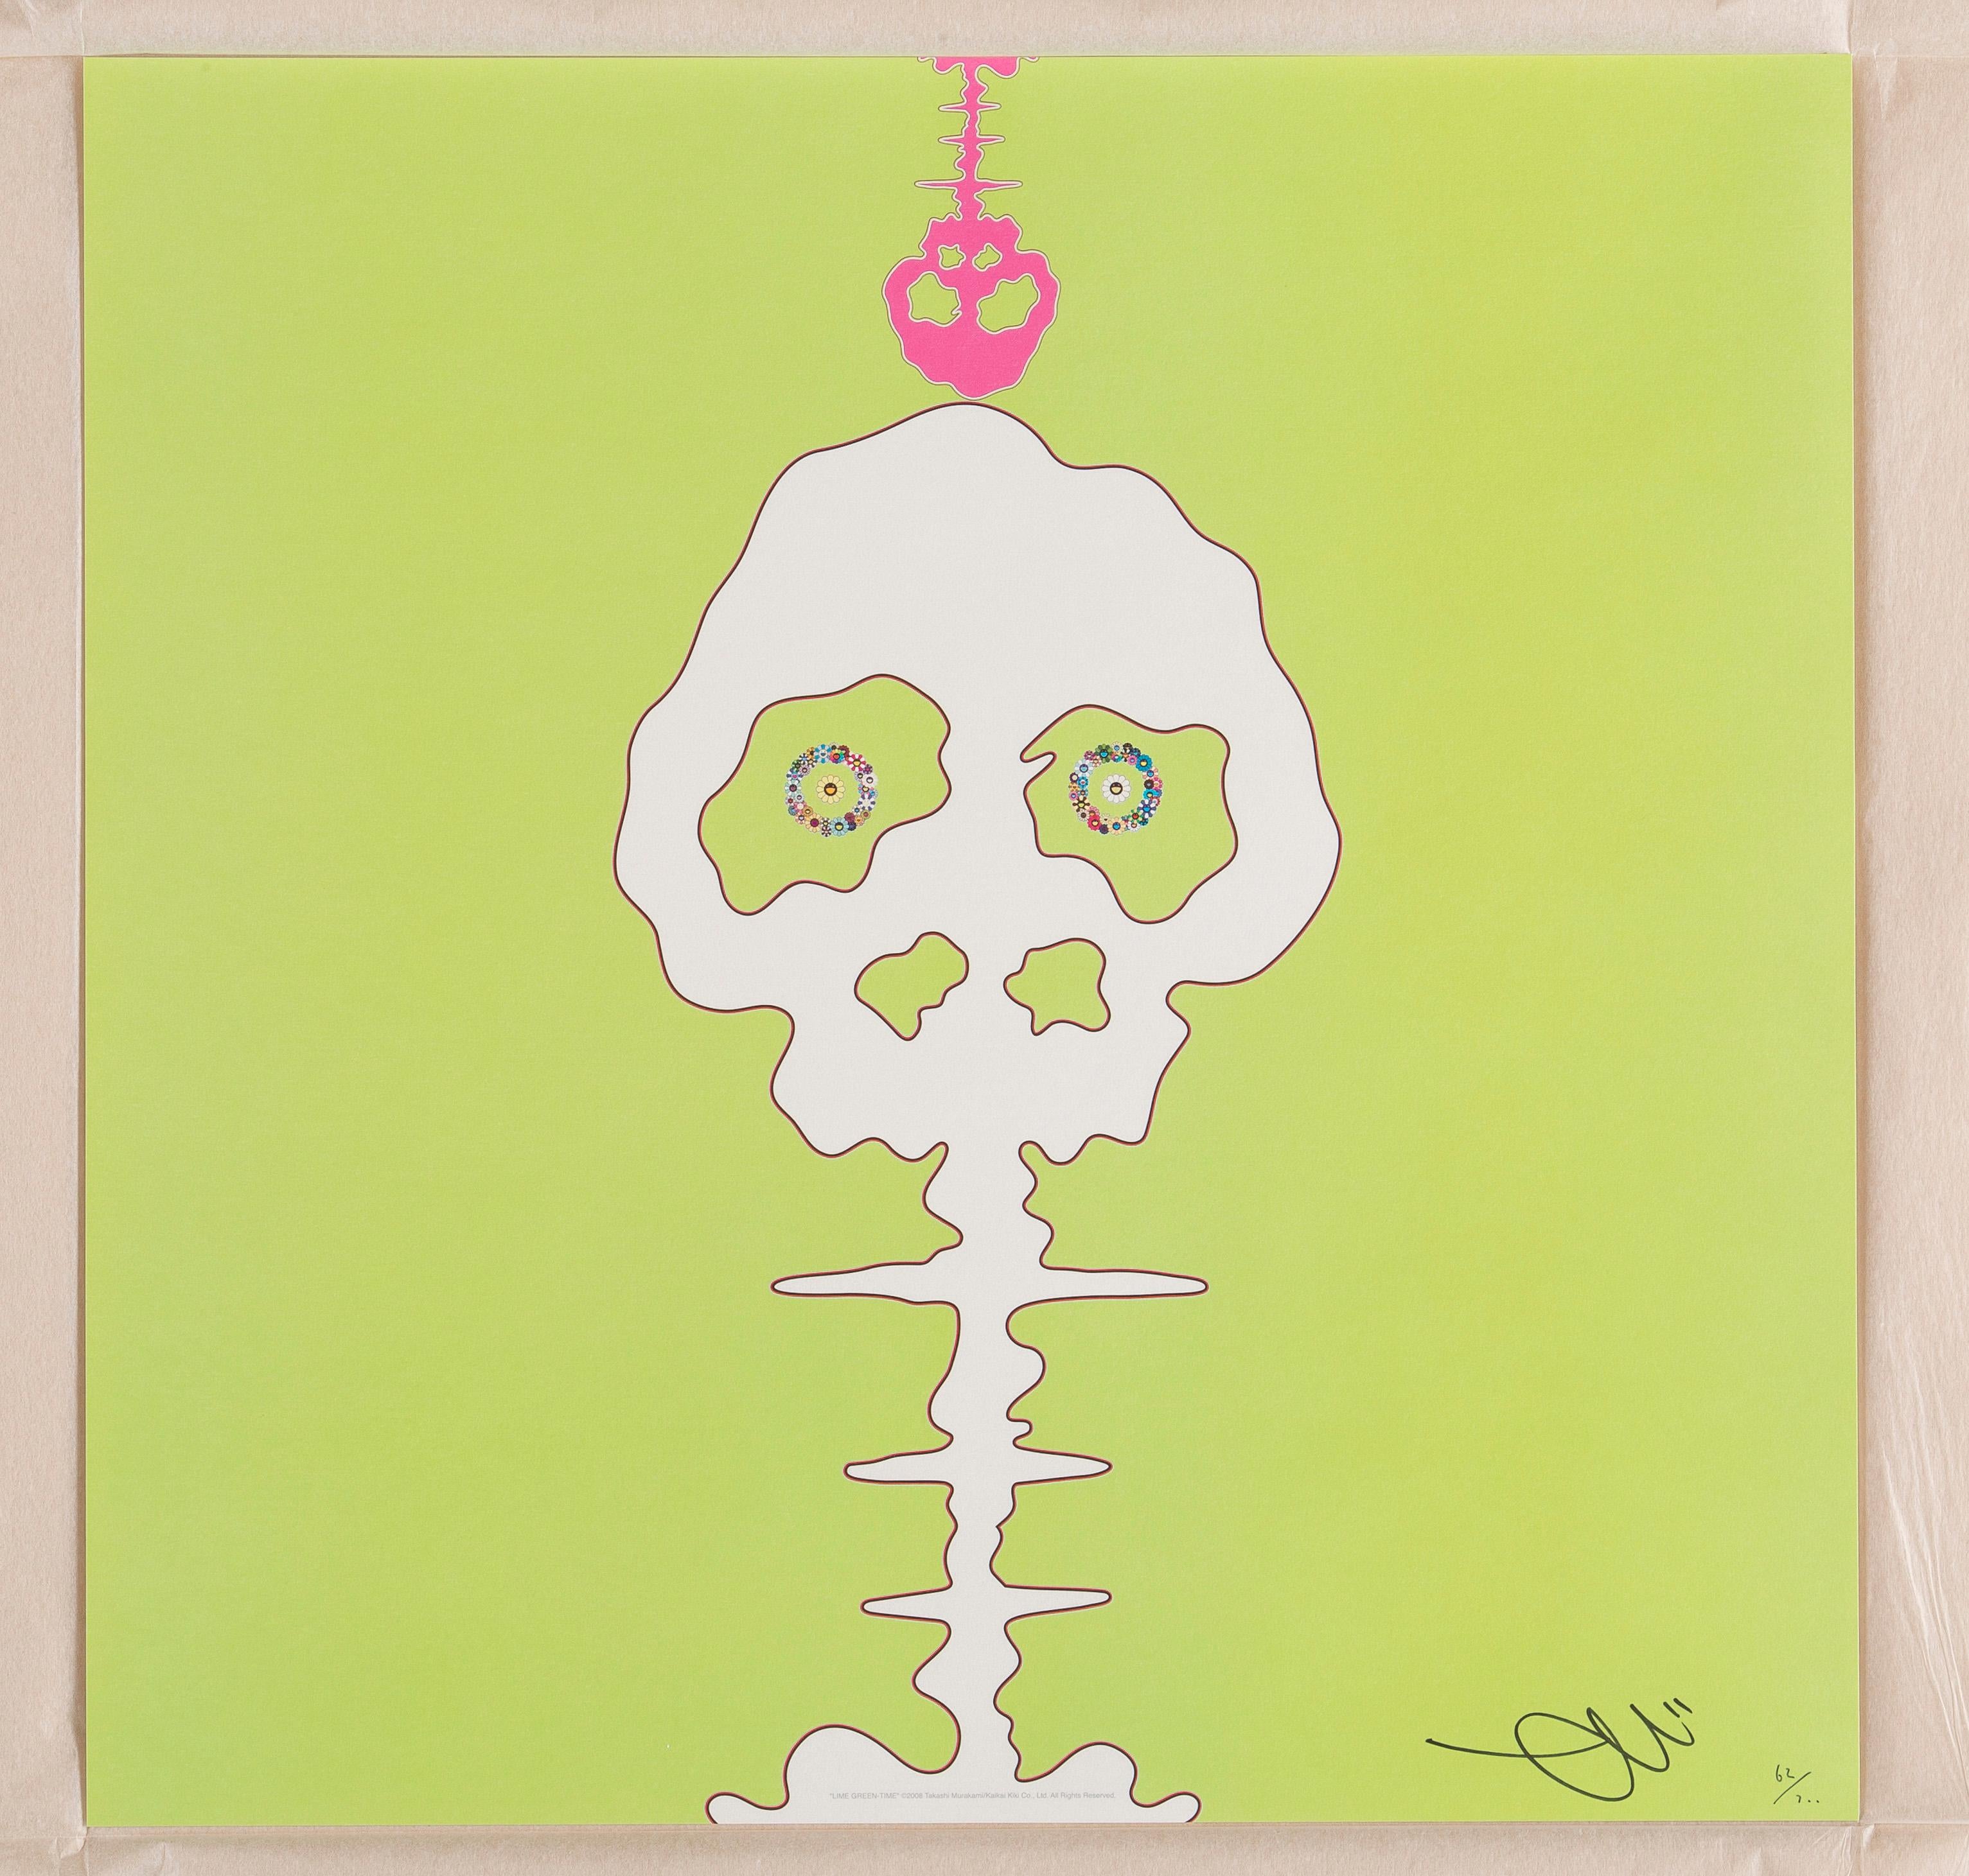 Lime Green - Time (Time Bokan) 2011 Limited Edition (print) by Murakami signed  - Print by Takashi Murakami